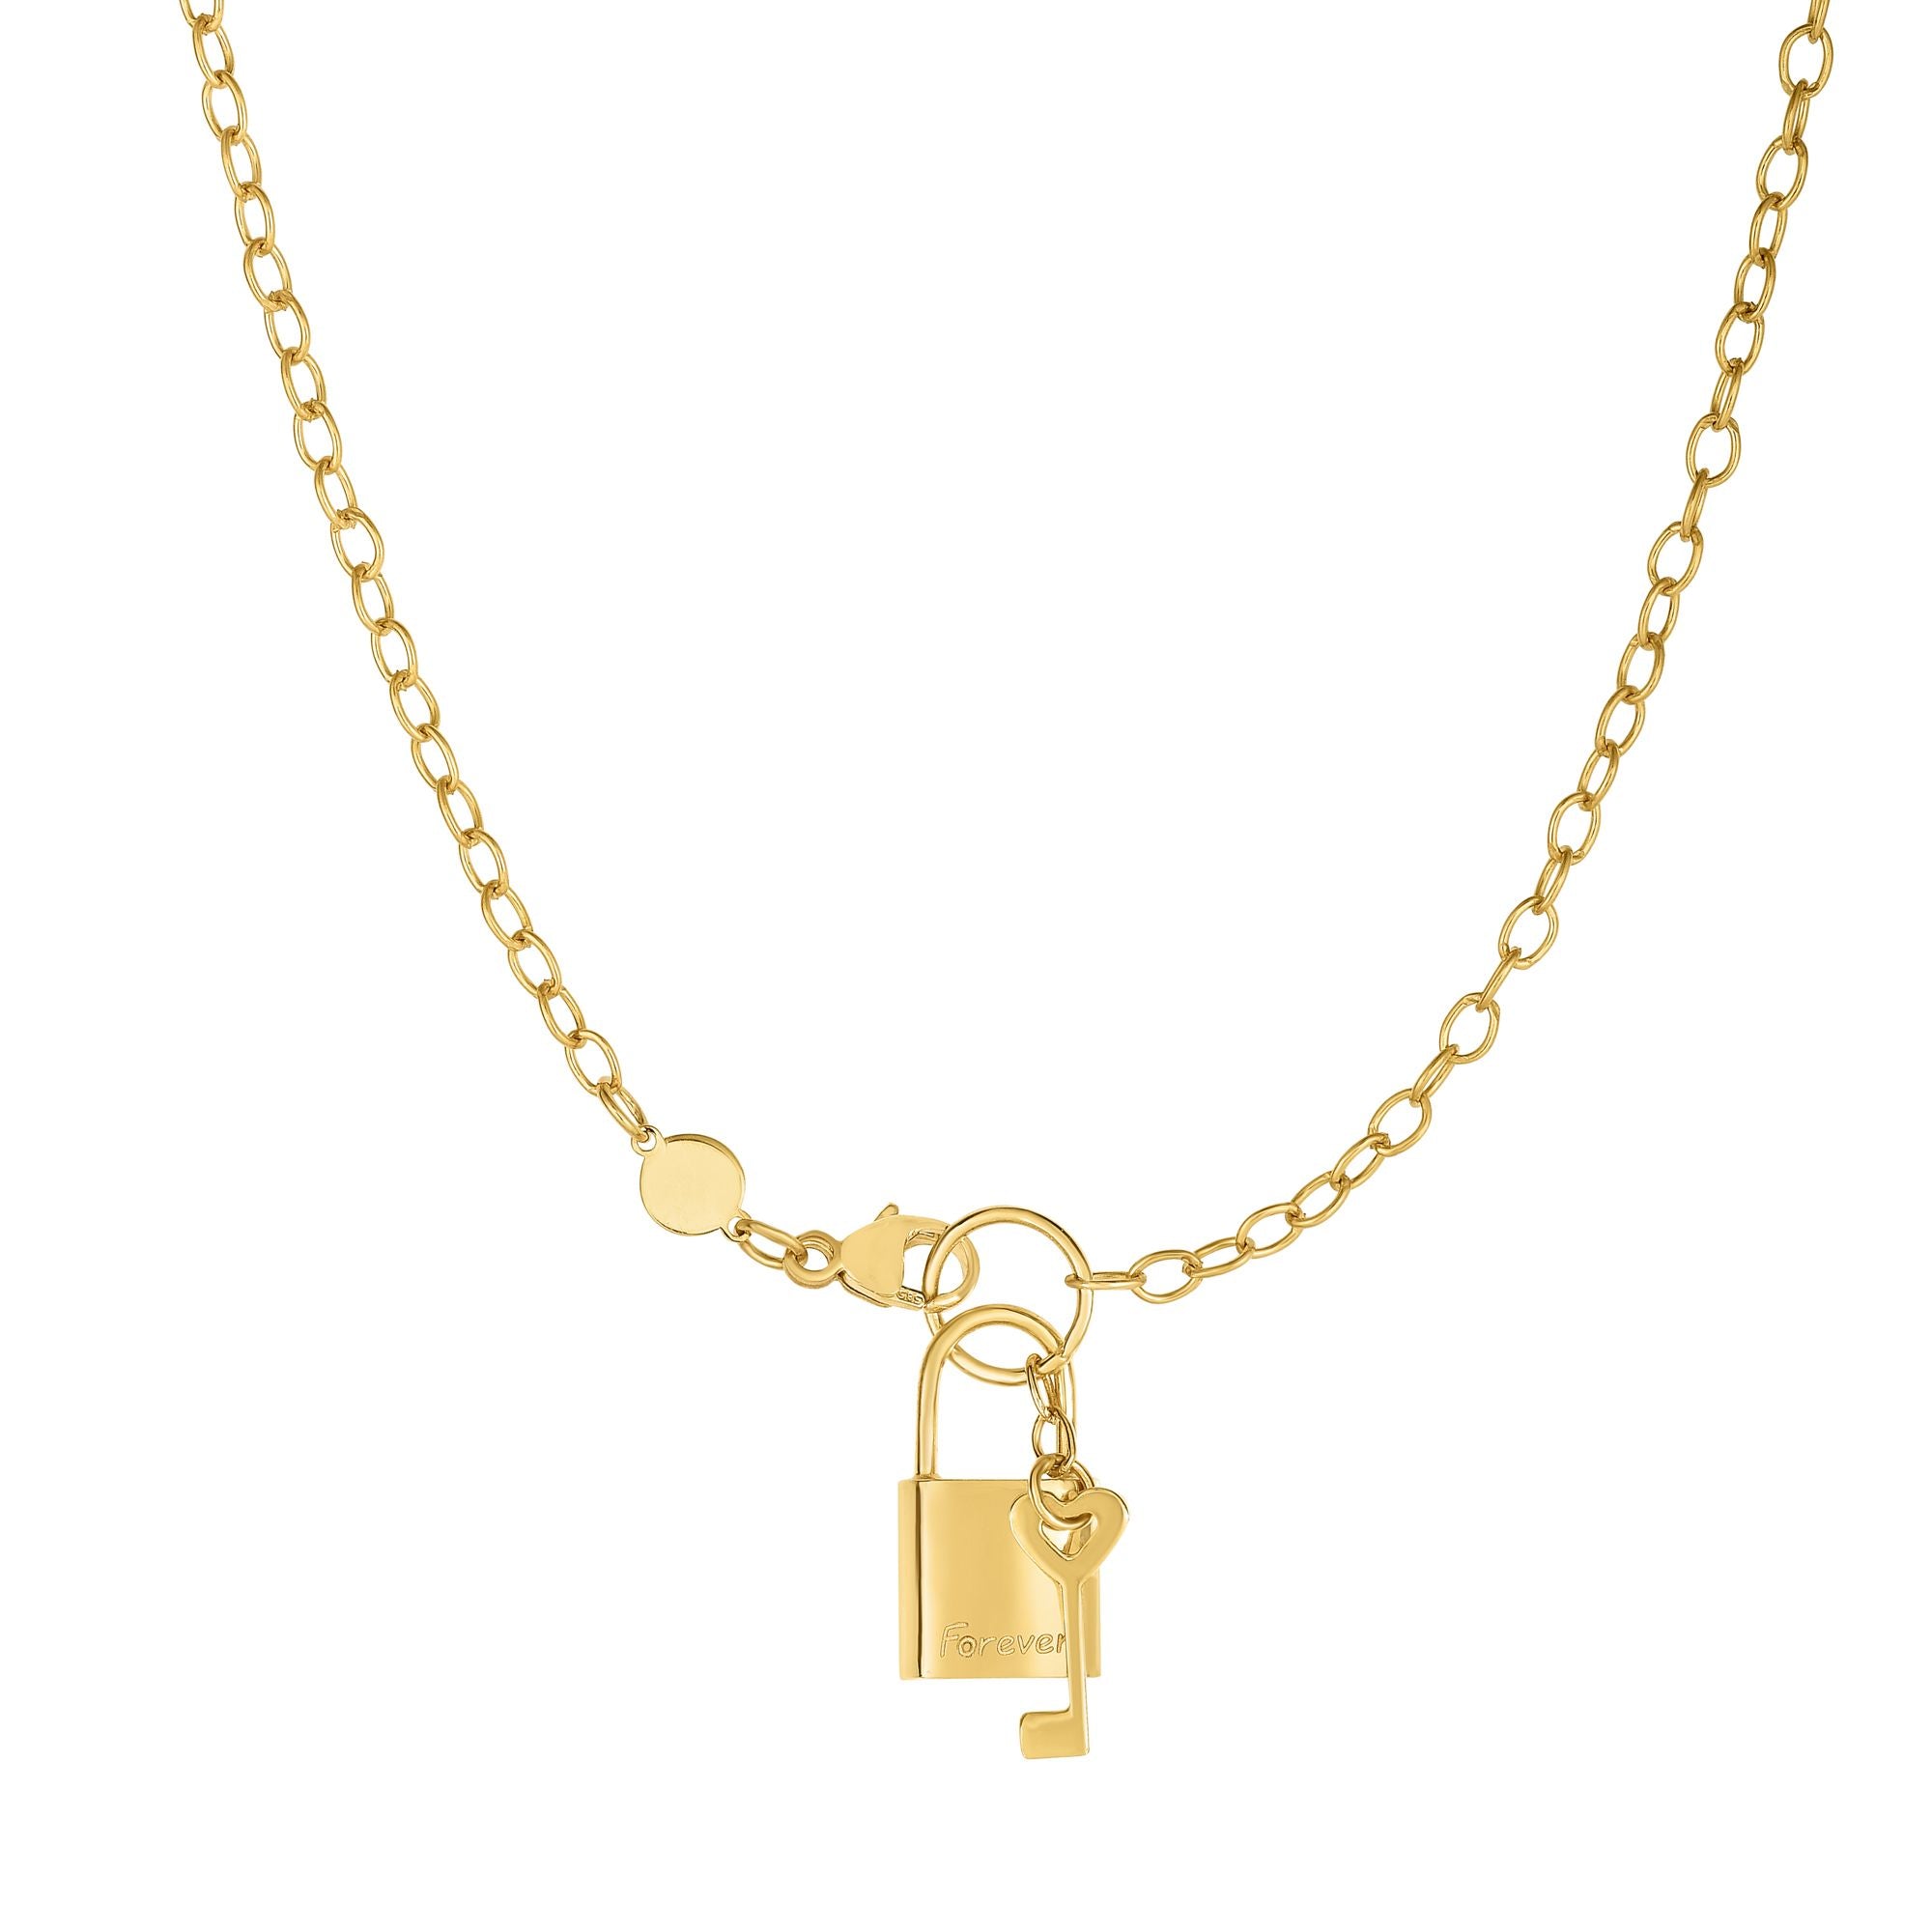 14K Yellow Gold Lock and Key Chain Necklace,18